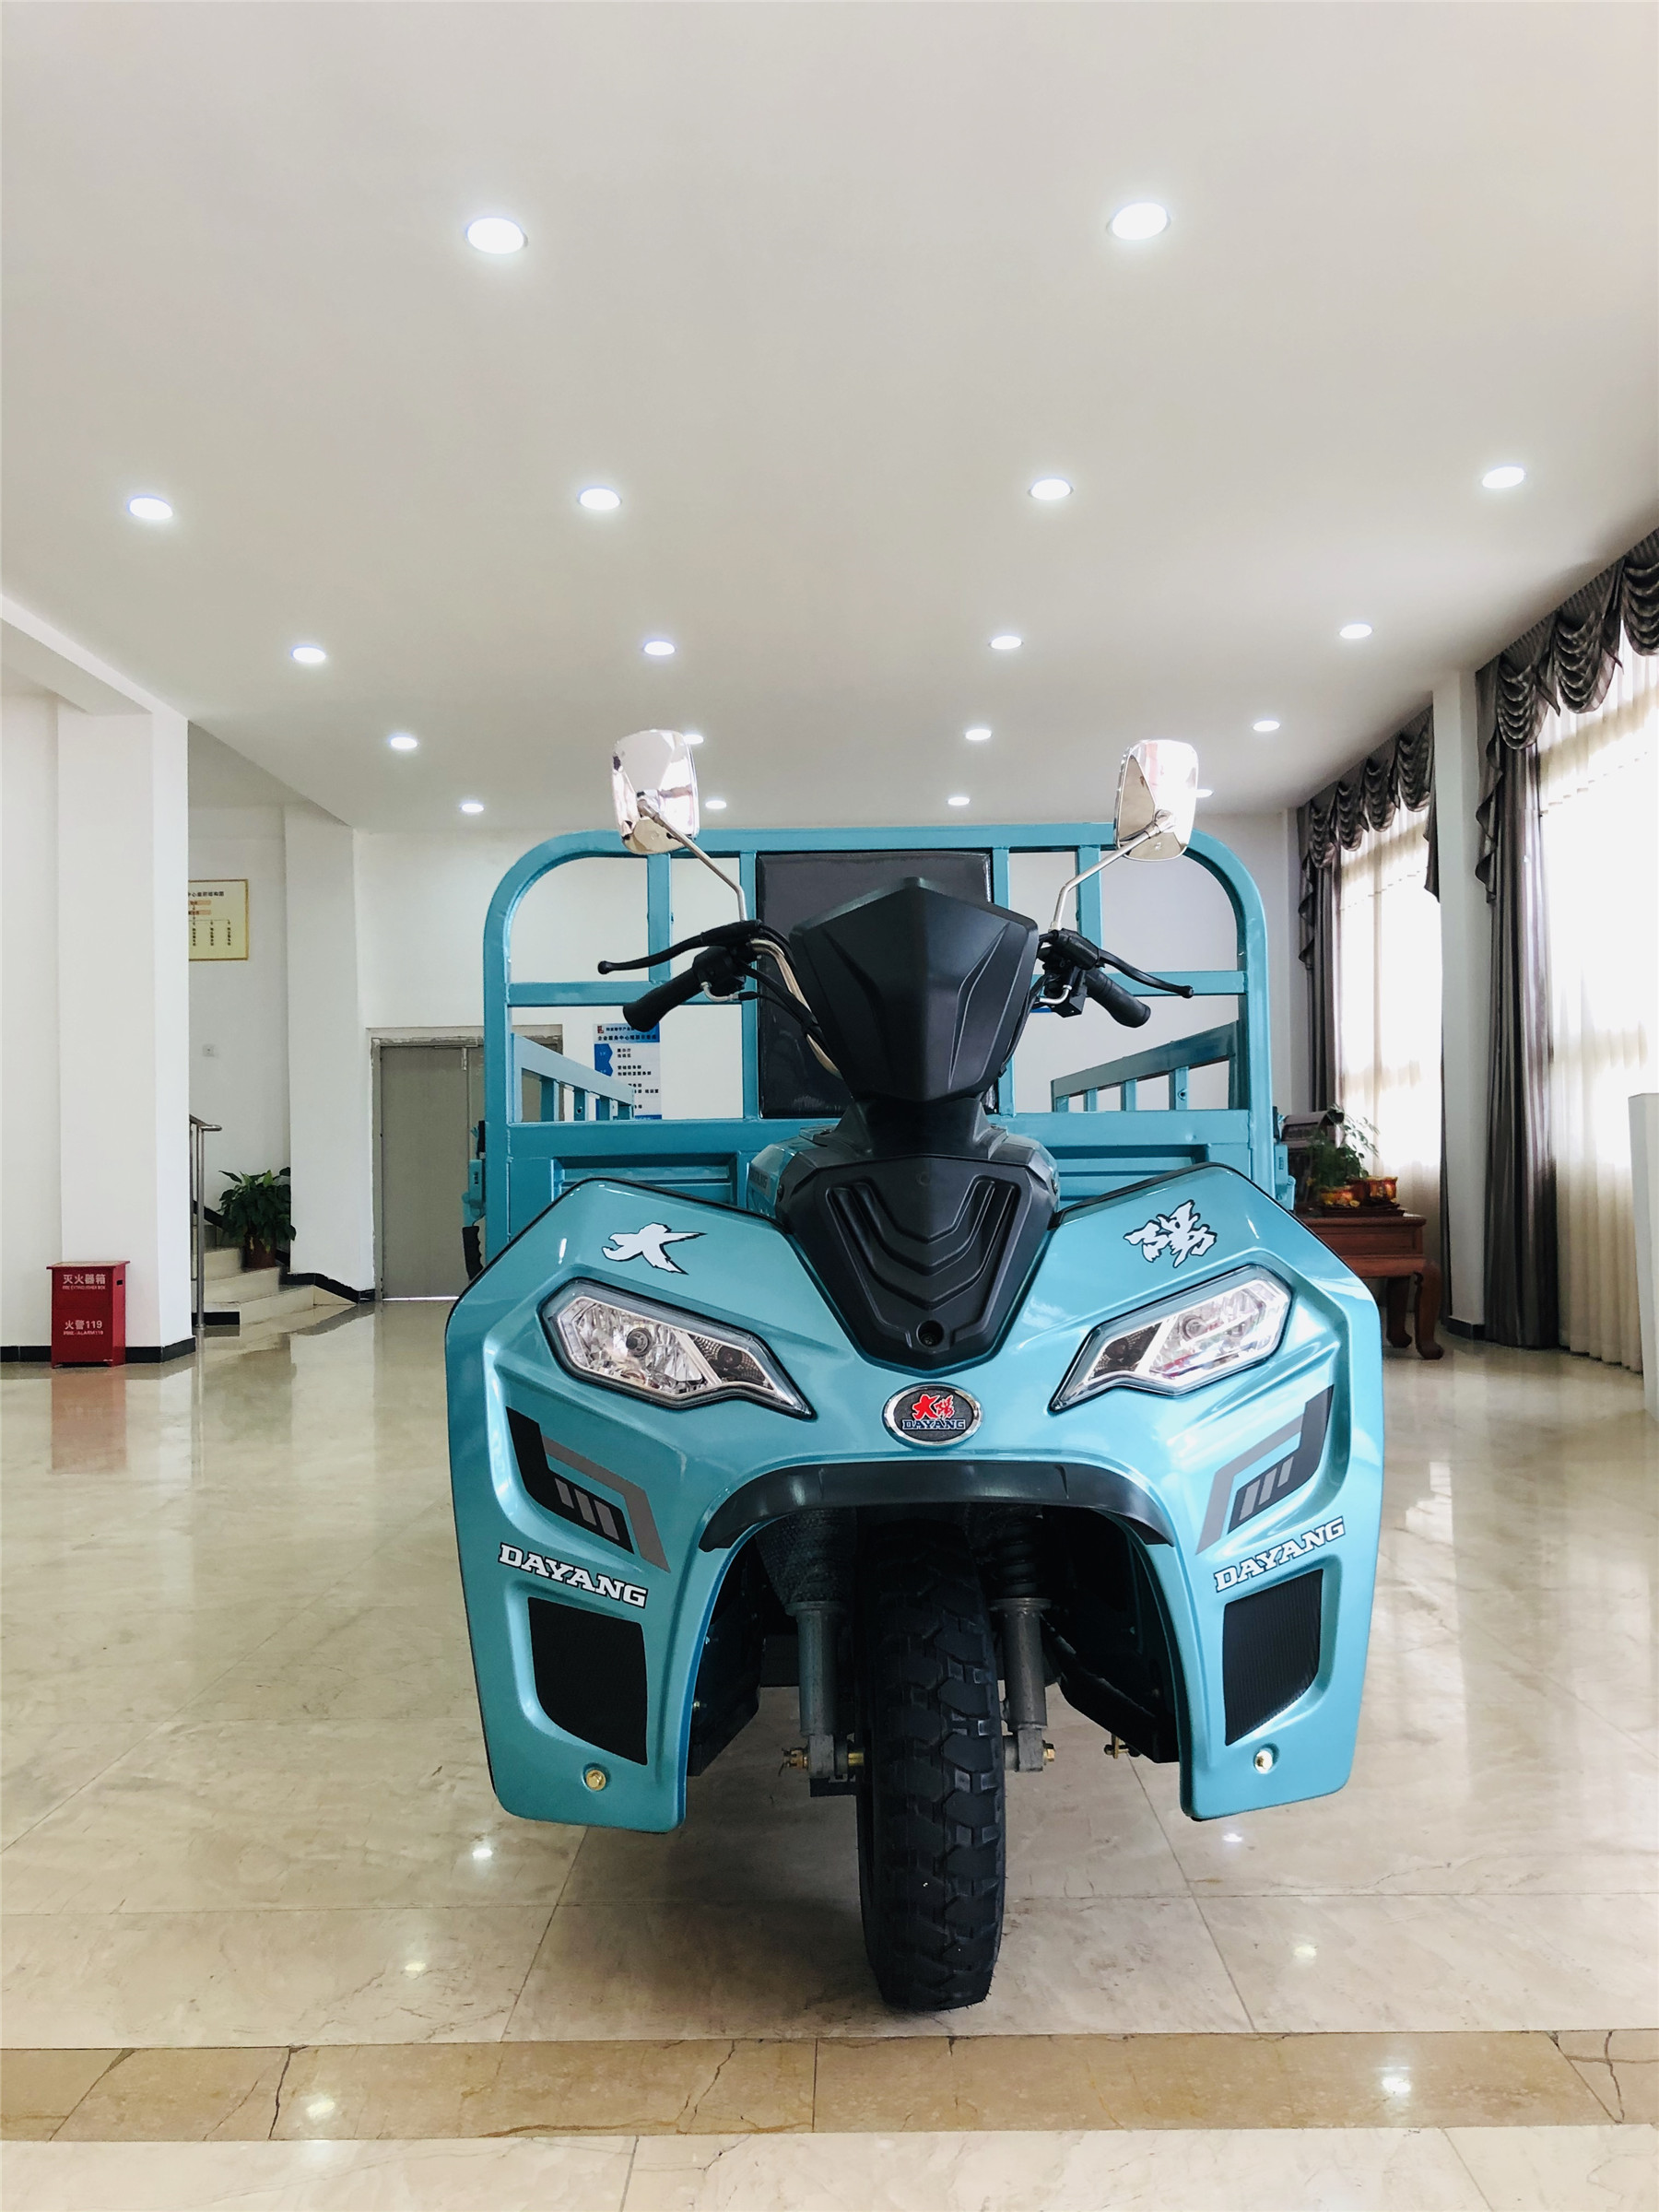 Popular style High Quality 200cc tricycle for cargo engine motorcycle tricycle trade en cote d'Ivoire